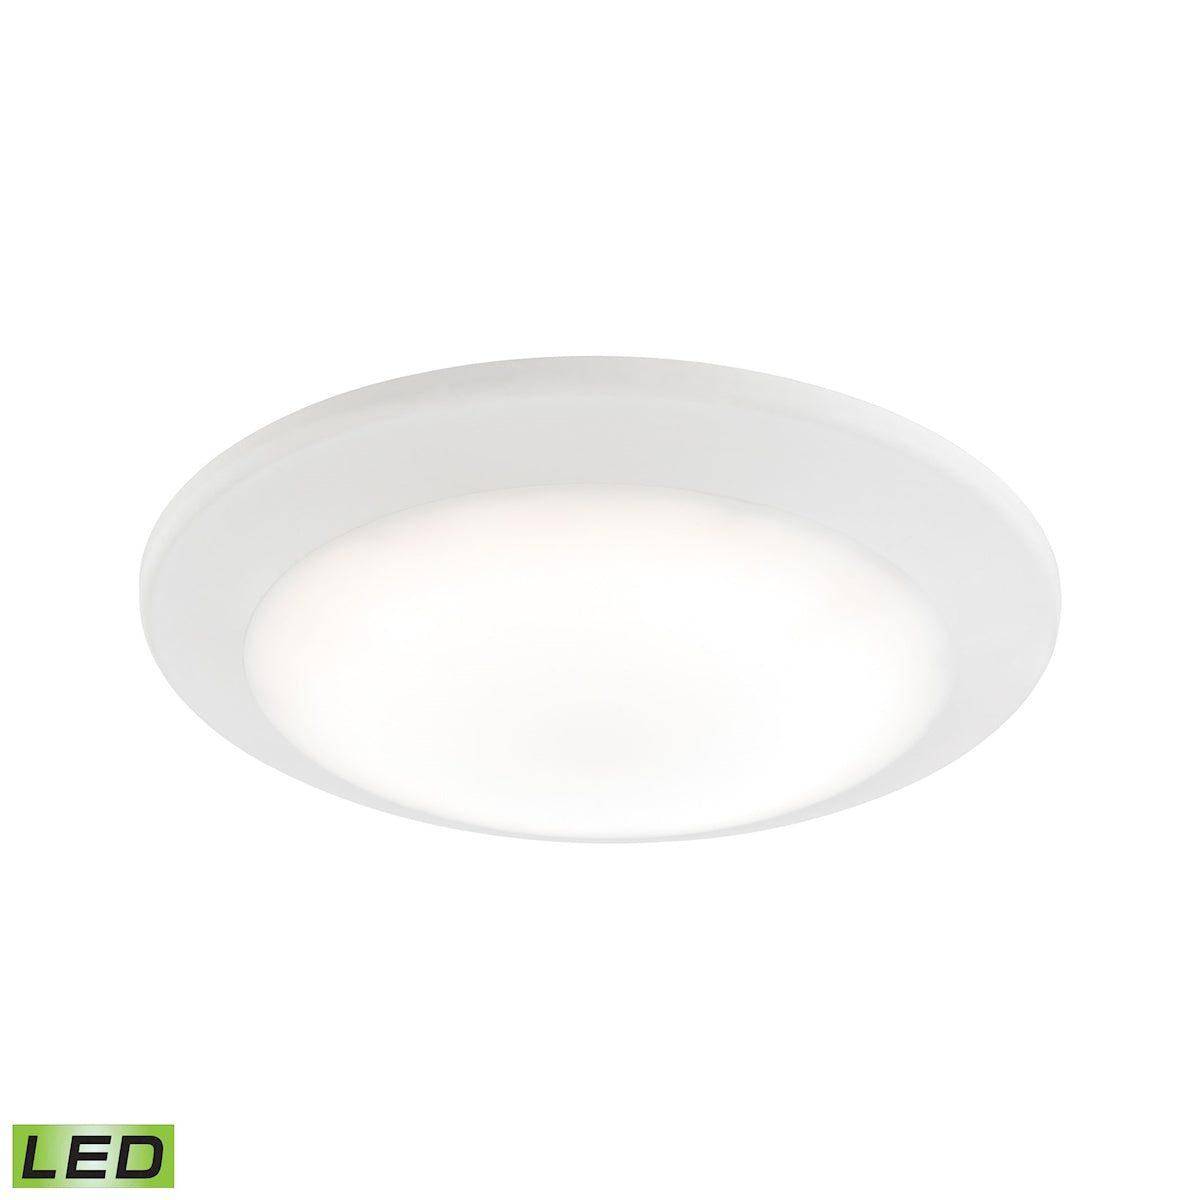 ELK Lighting MLE1201-5-30 Plandome 1-Light Recessed Light in Clean White with Glass Diffuser